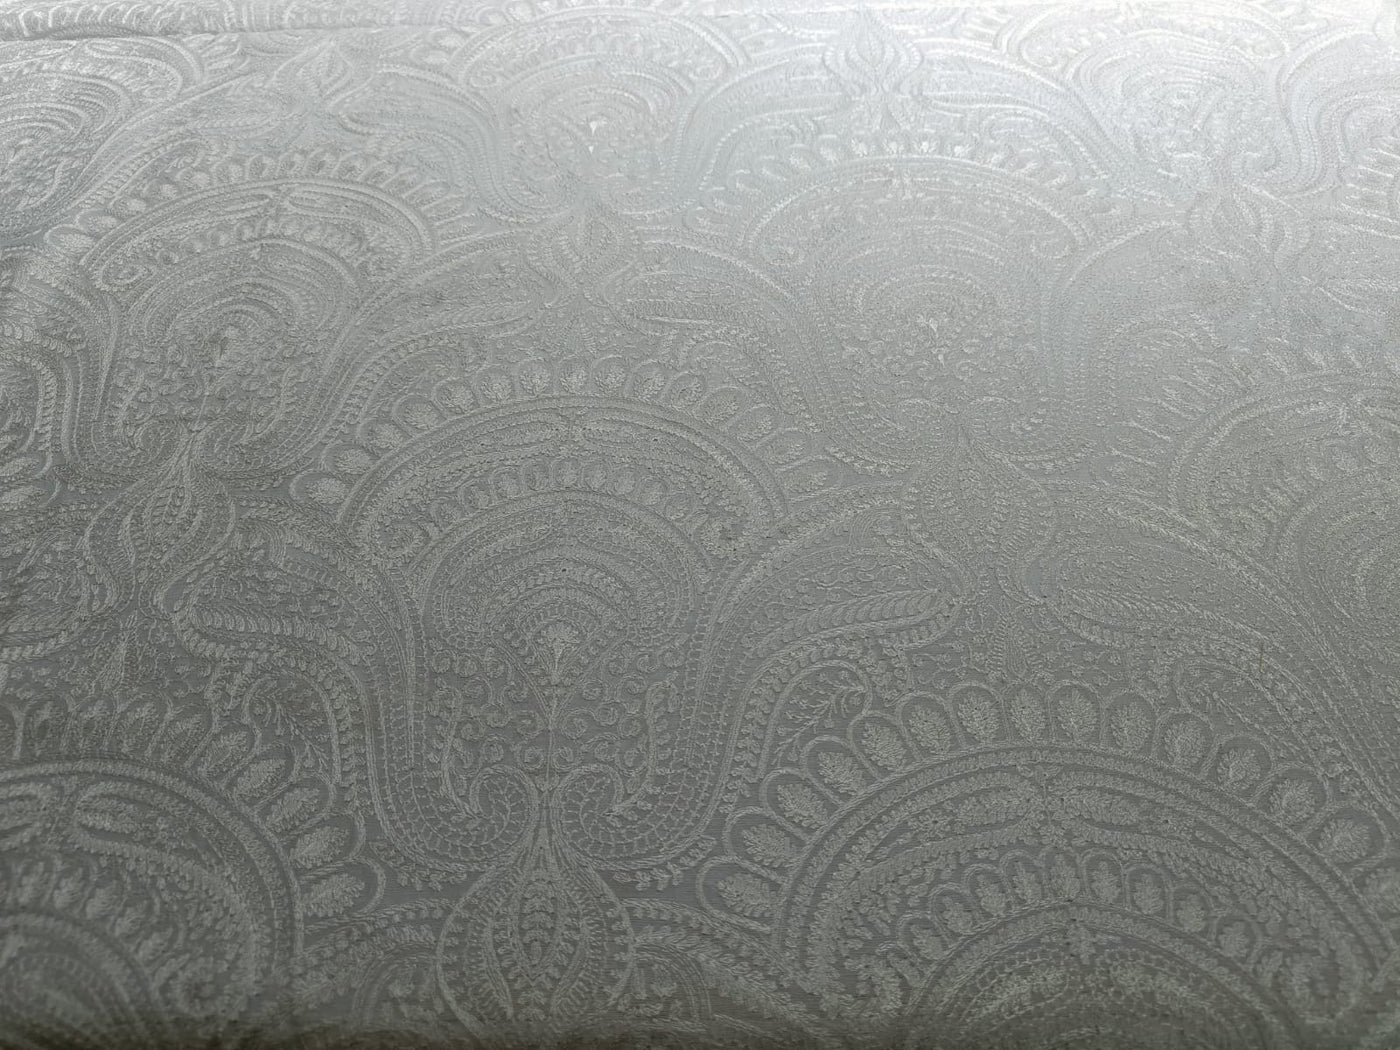 100% Pure Cotton Chanderi Embroidered White color 44" wide by the yard [12453-12459]